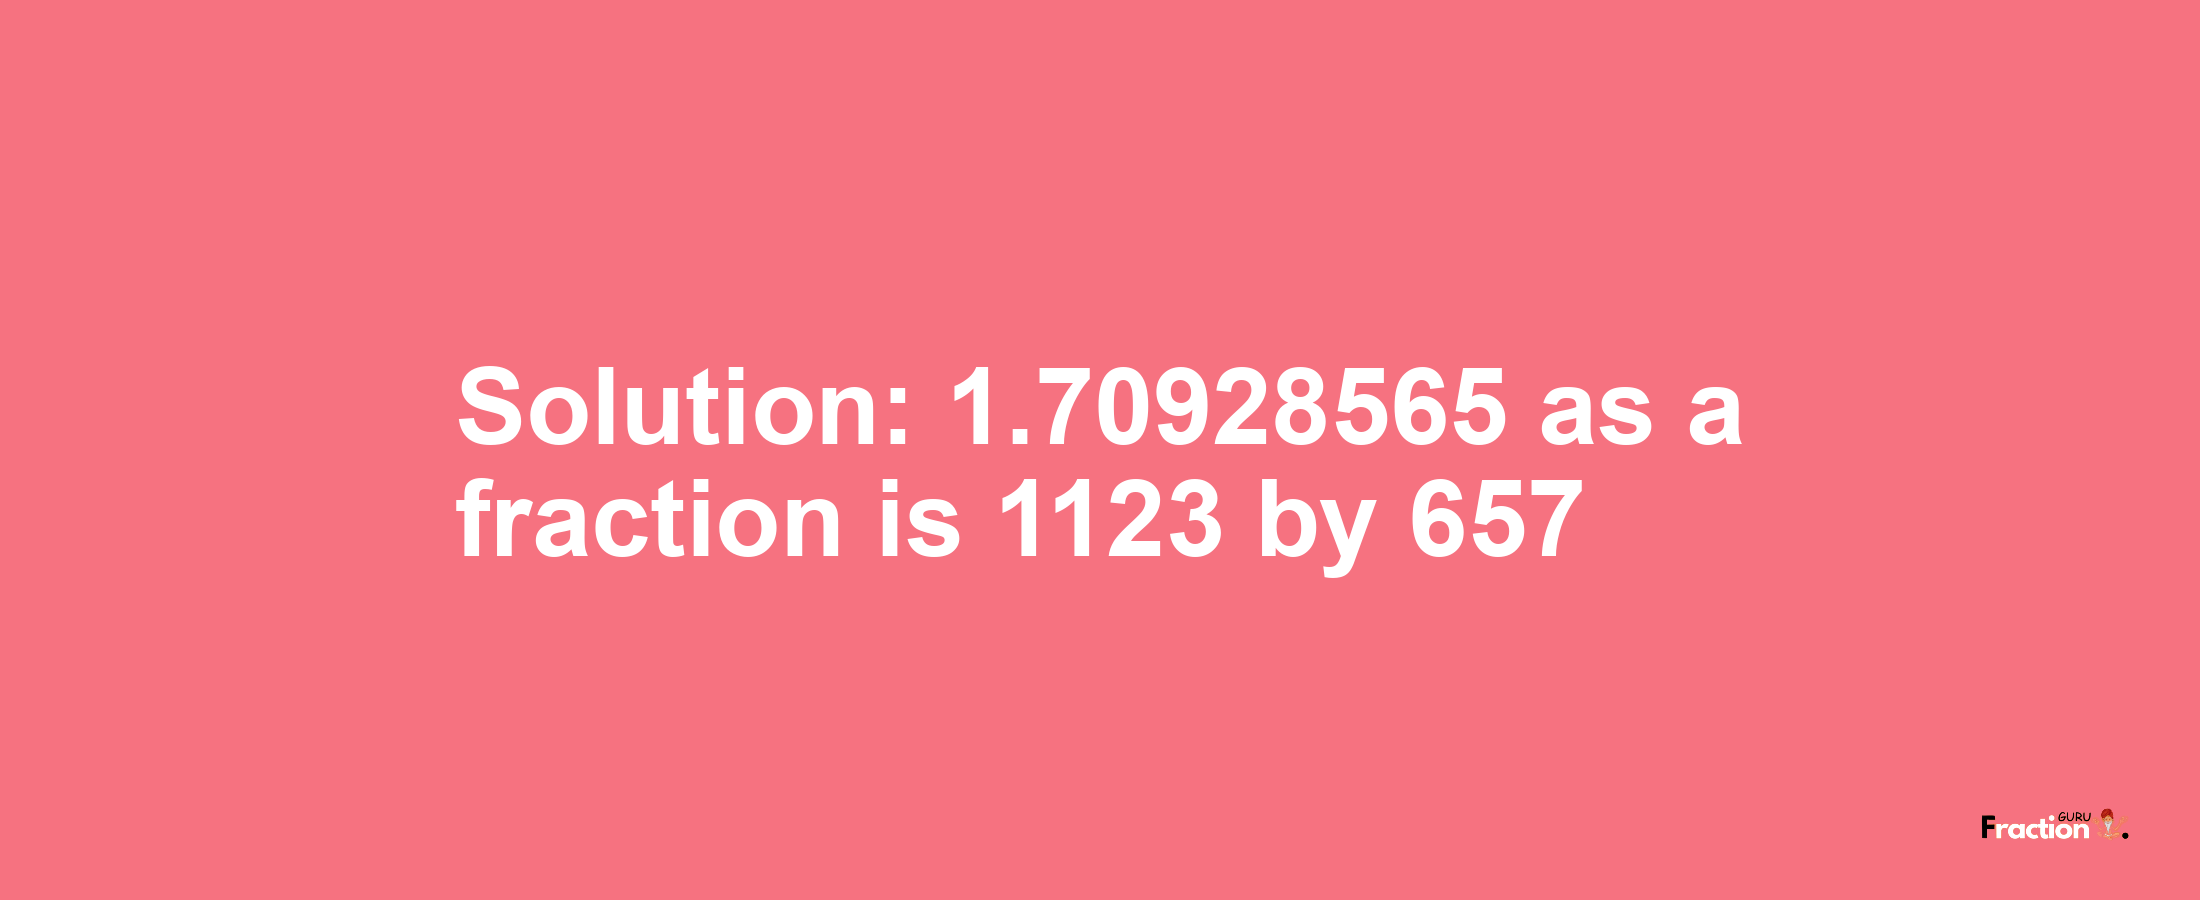 Solution:1.70928565 as a fraction is 1123/657